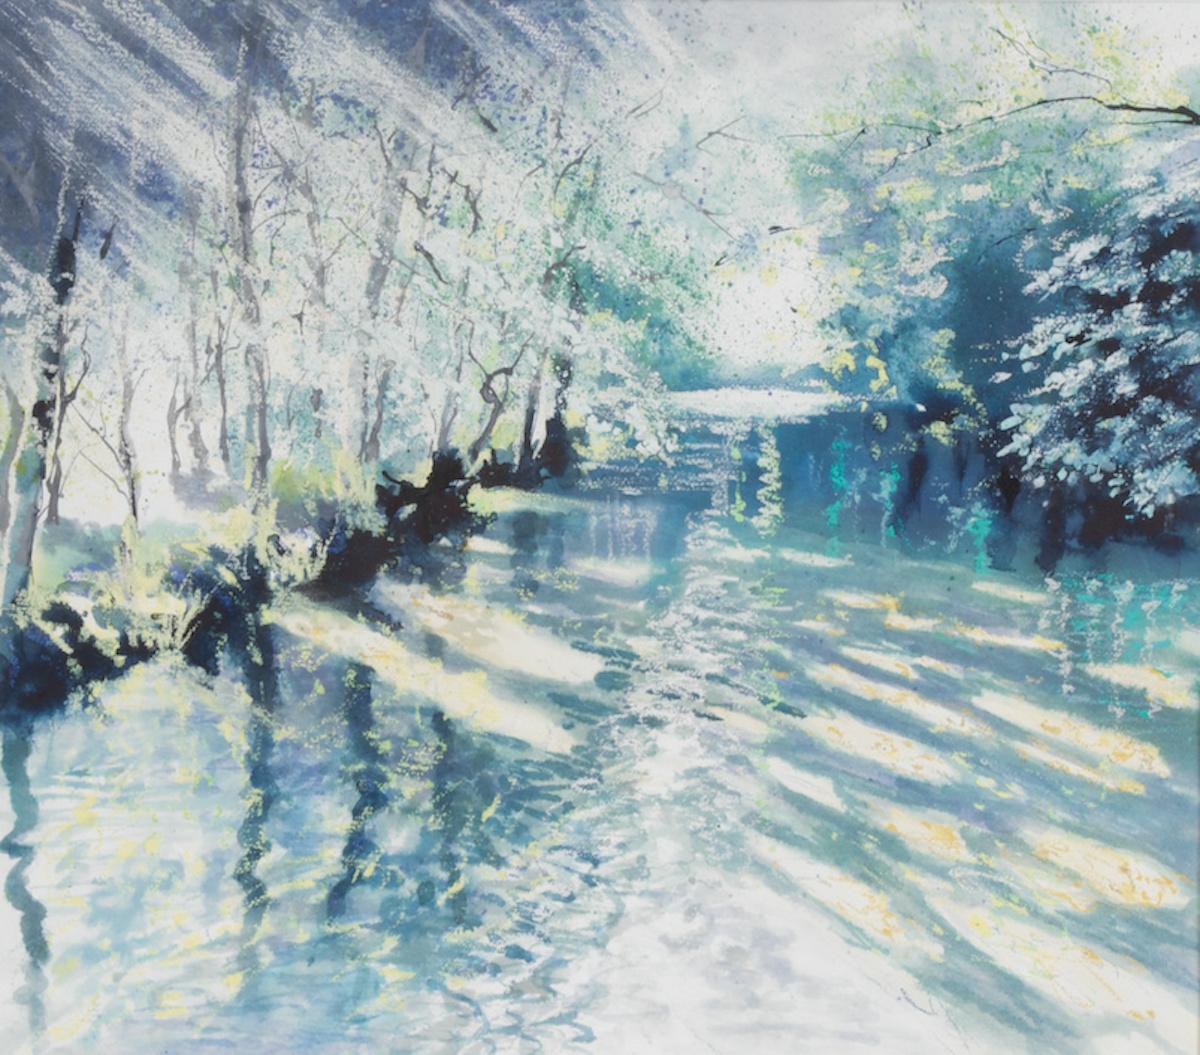 Nicola Wiehahn Figurative Painting - Early River Light, Original Painting, Landscape Art, Tree Lined River Painting